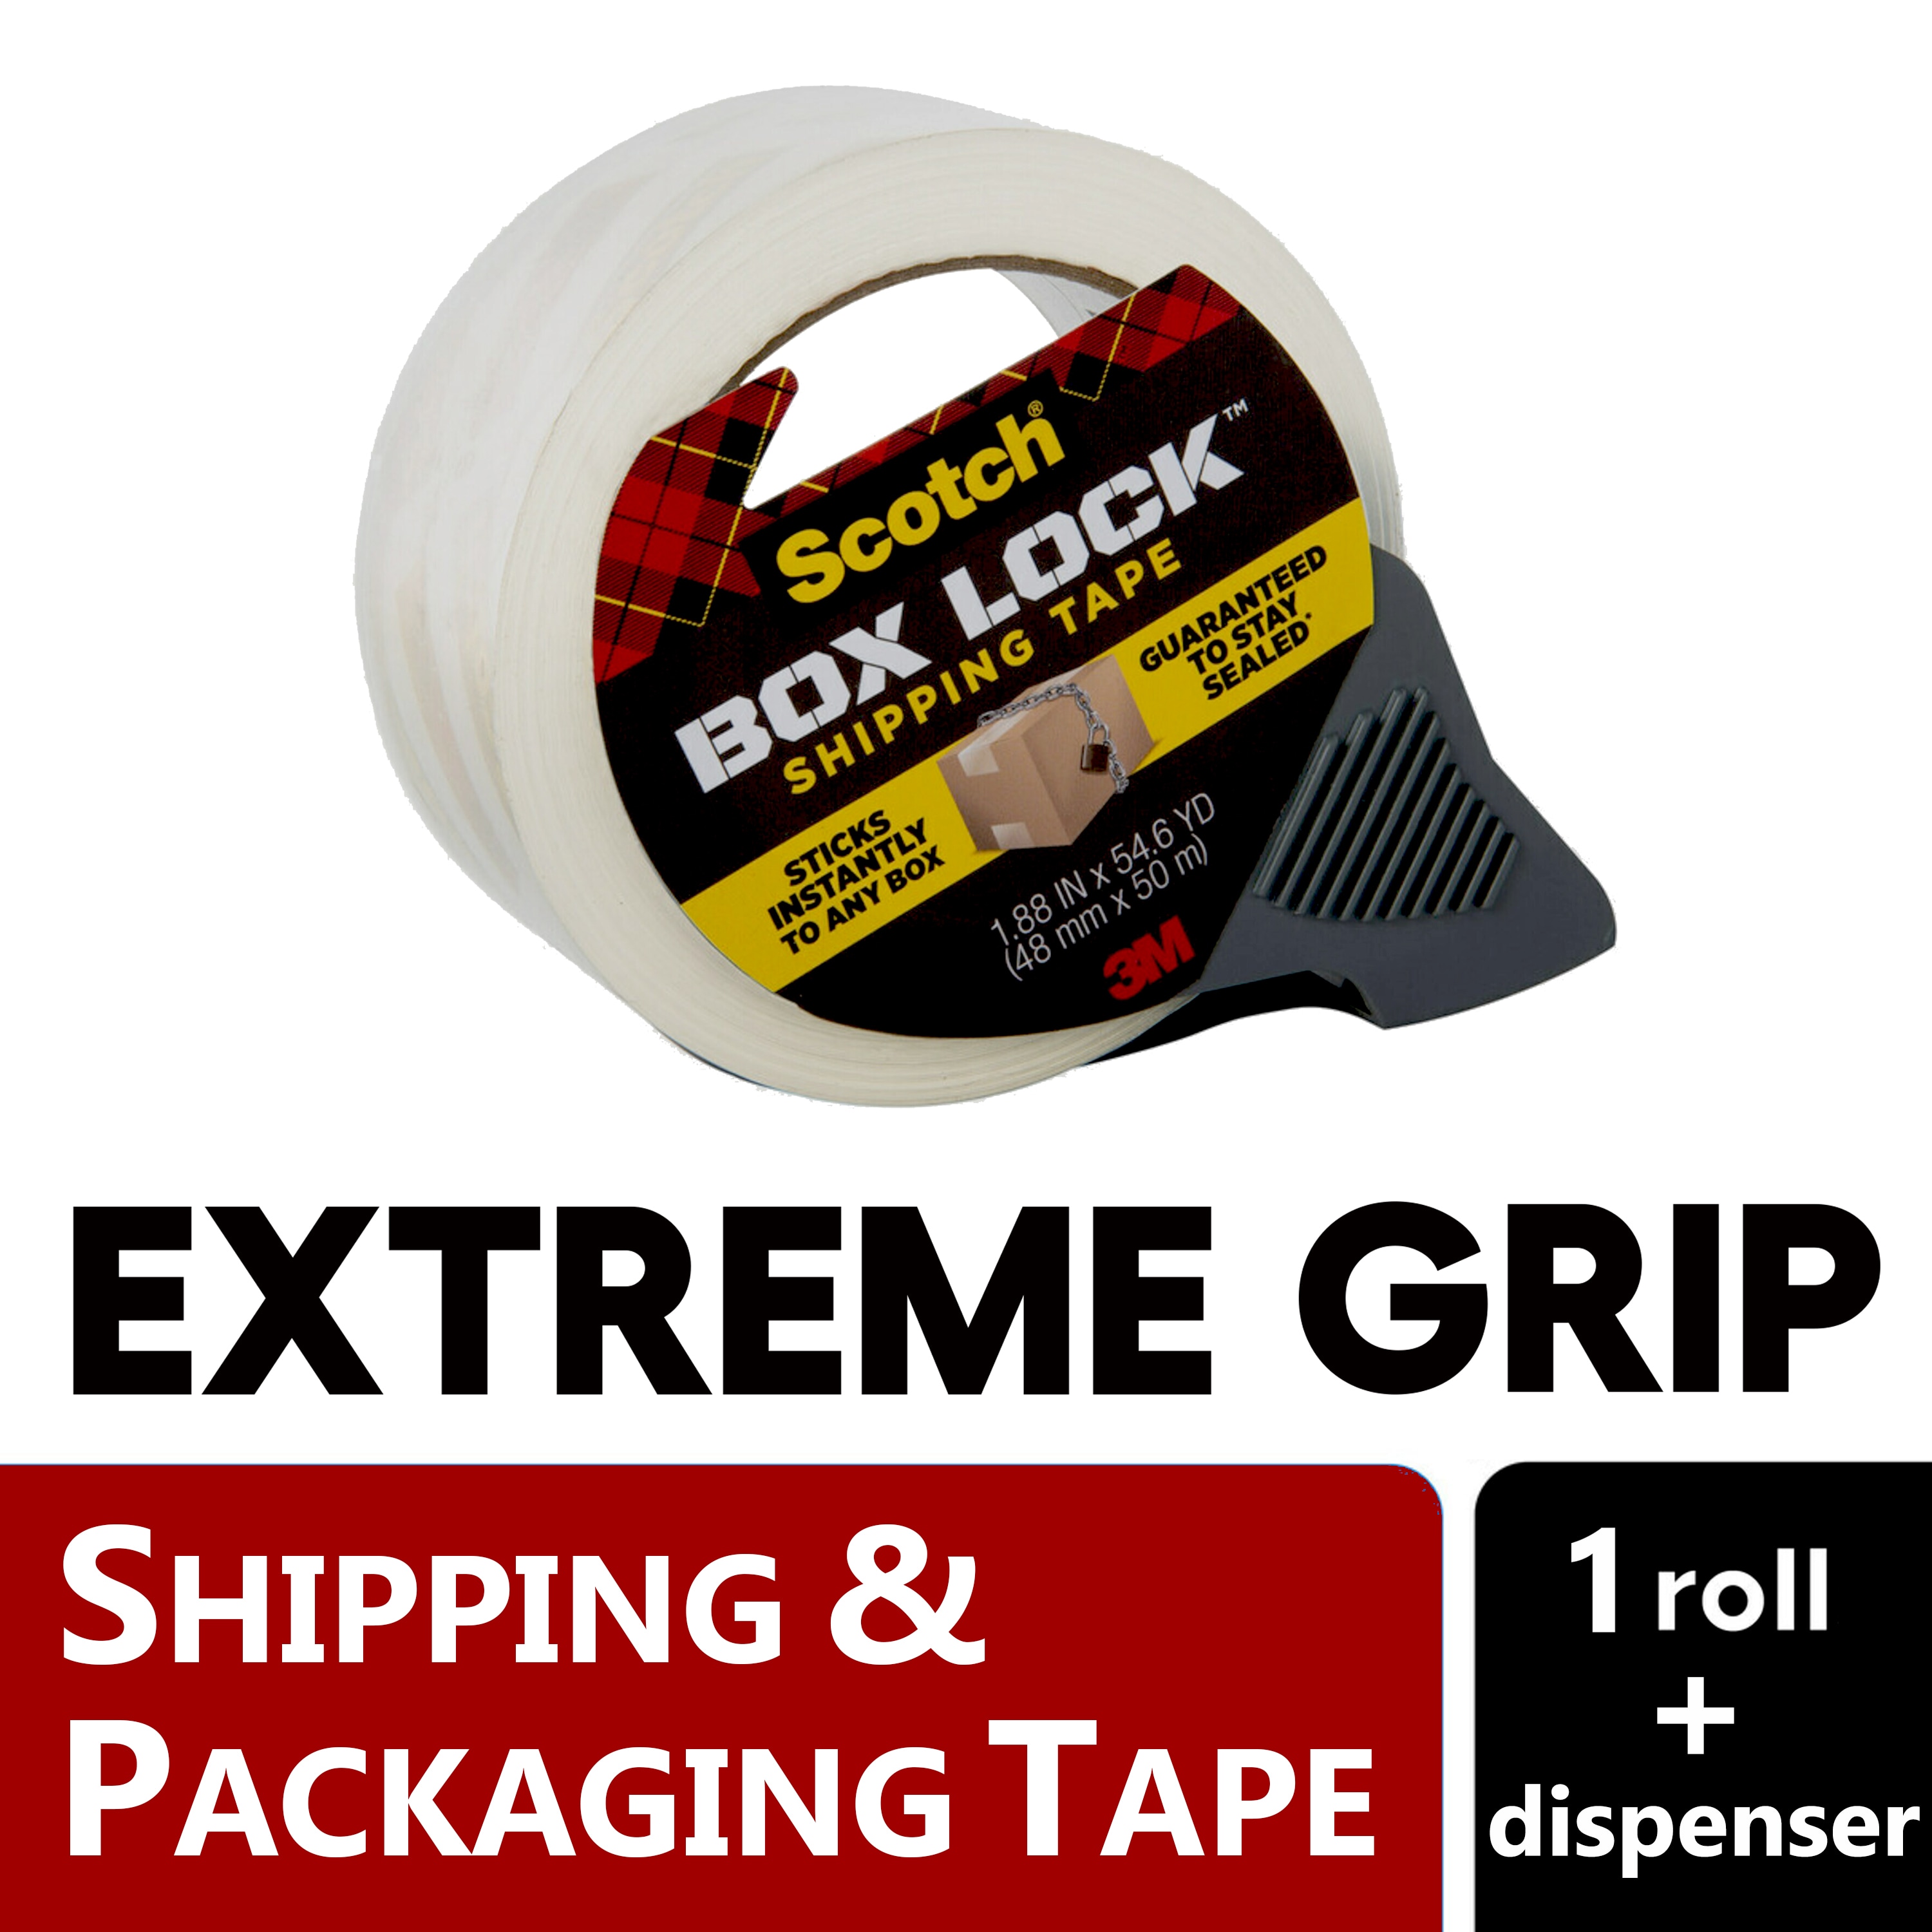 DUCK TAPE 224530 Brown Packing Tape, 25m x 50mm